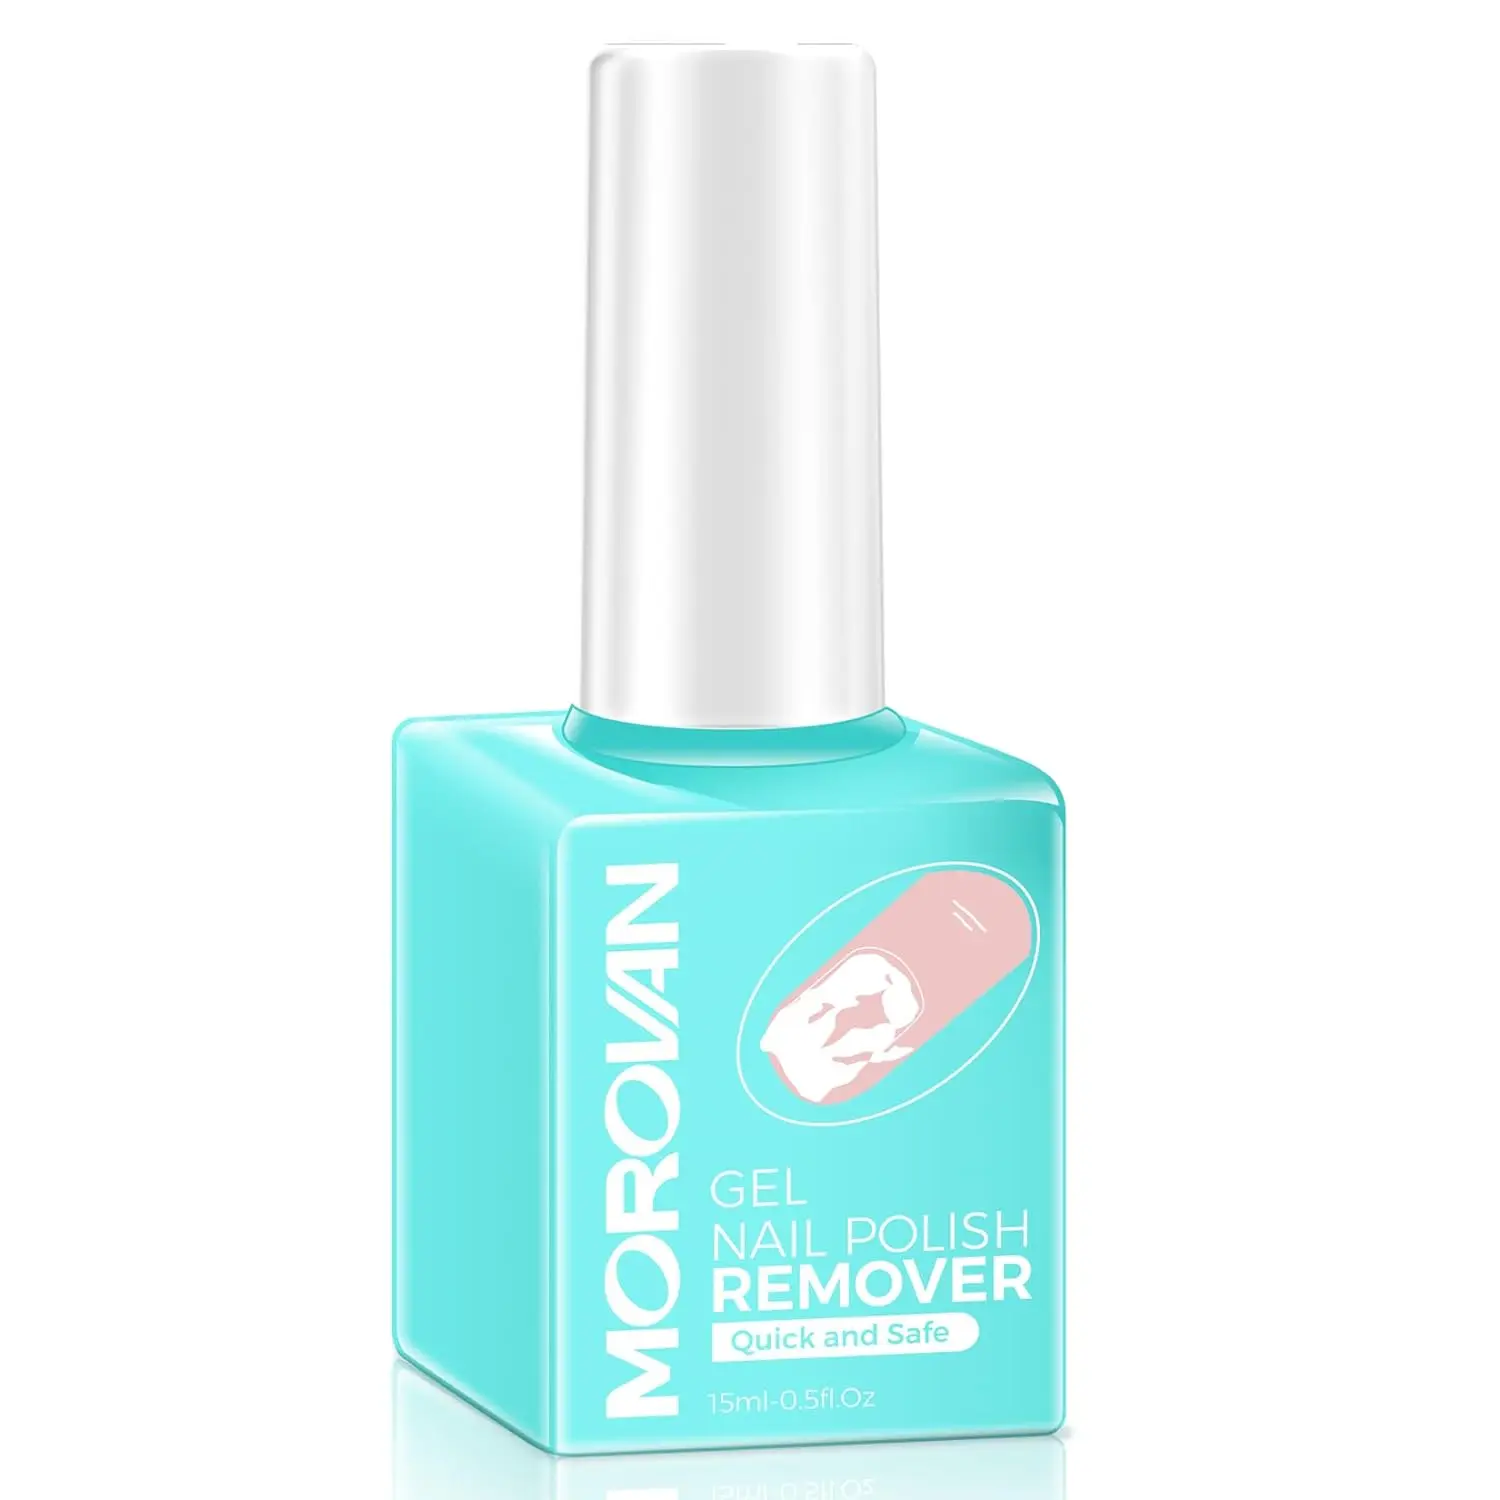 Gel Nail Polish Remove for Nails Quickly & Easily And Effectively Remove Gel Polish in 3-5 Minutes No Need Soaking or Wrapping